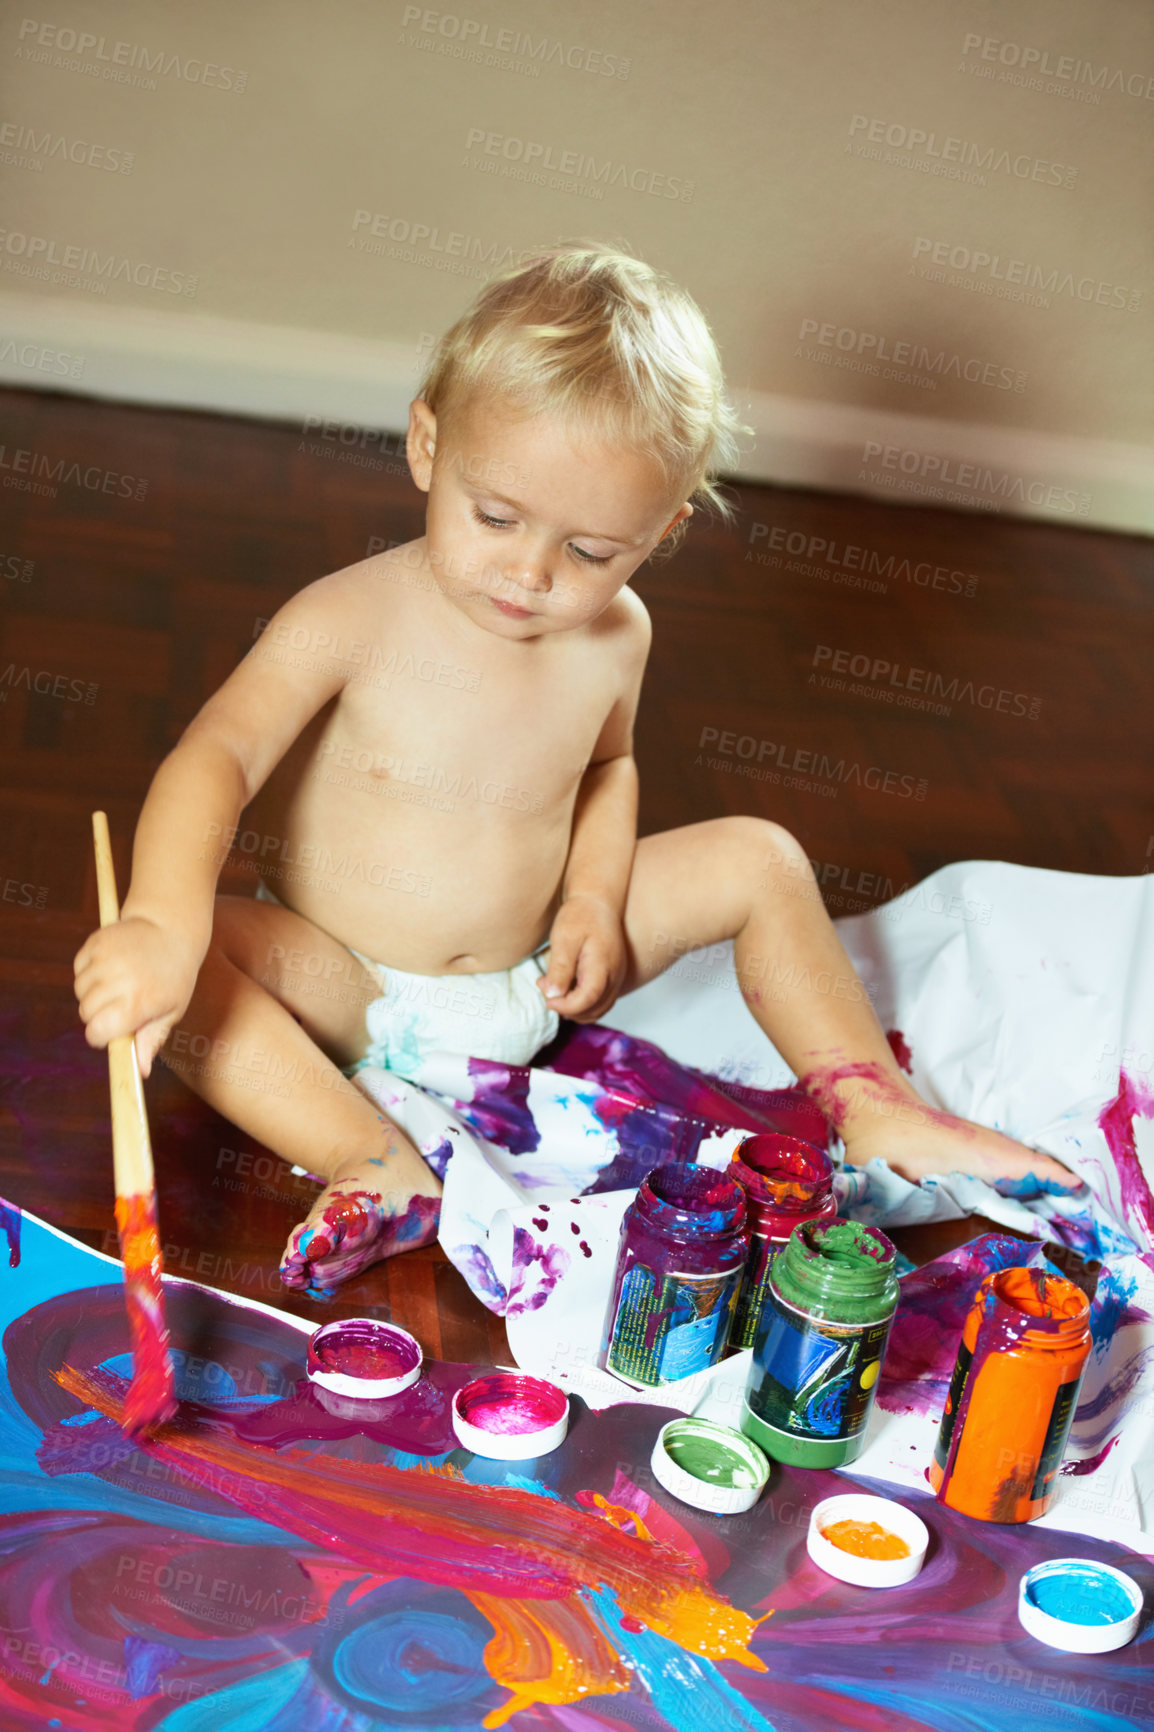 Buy stock photo Creative little baby boy painting with vibrant colors and paints. Small child sitting alone in a diaper and enjoying creative activity at home. Practicing motor skills in fun, artistic activities